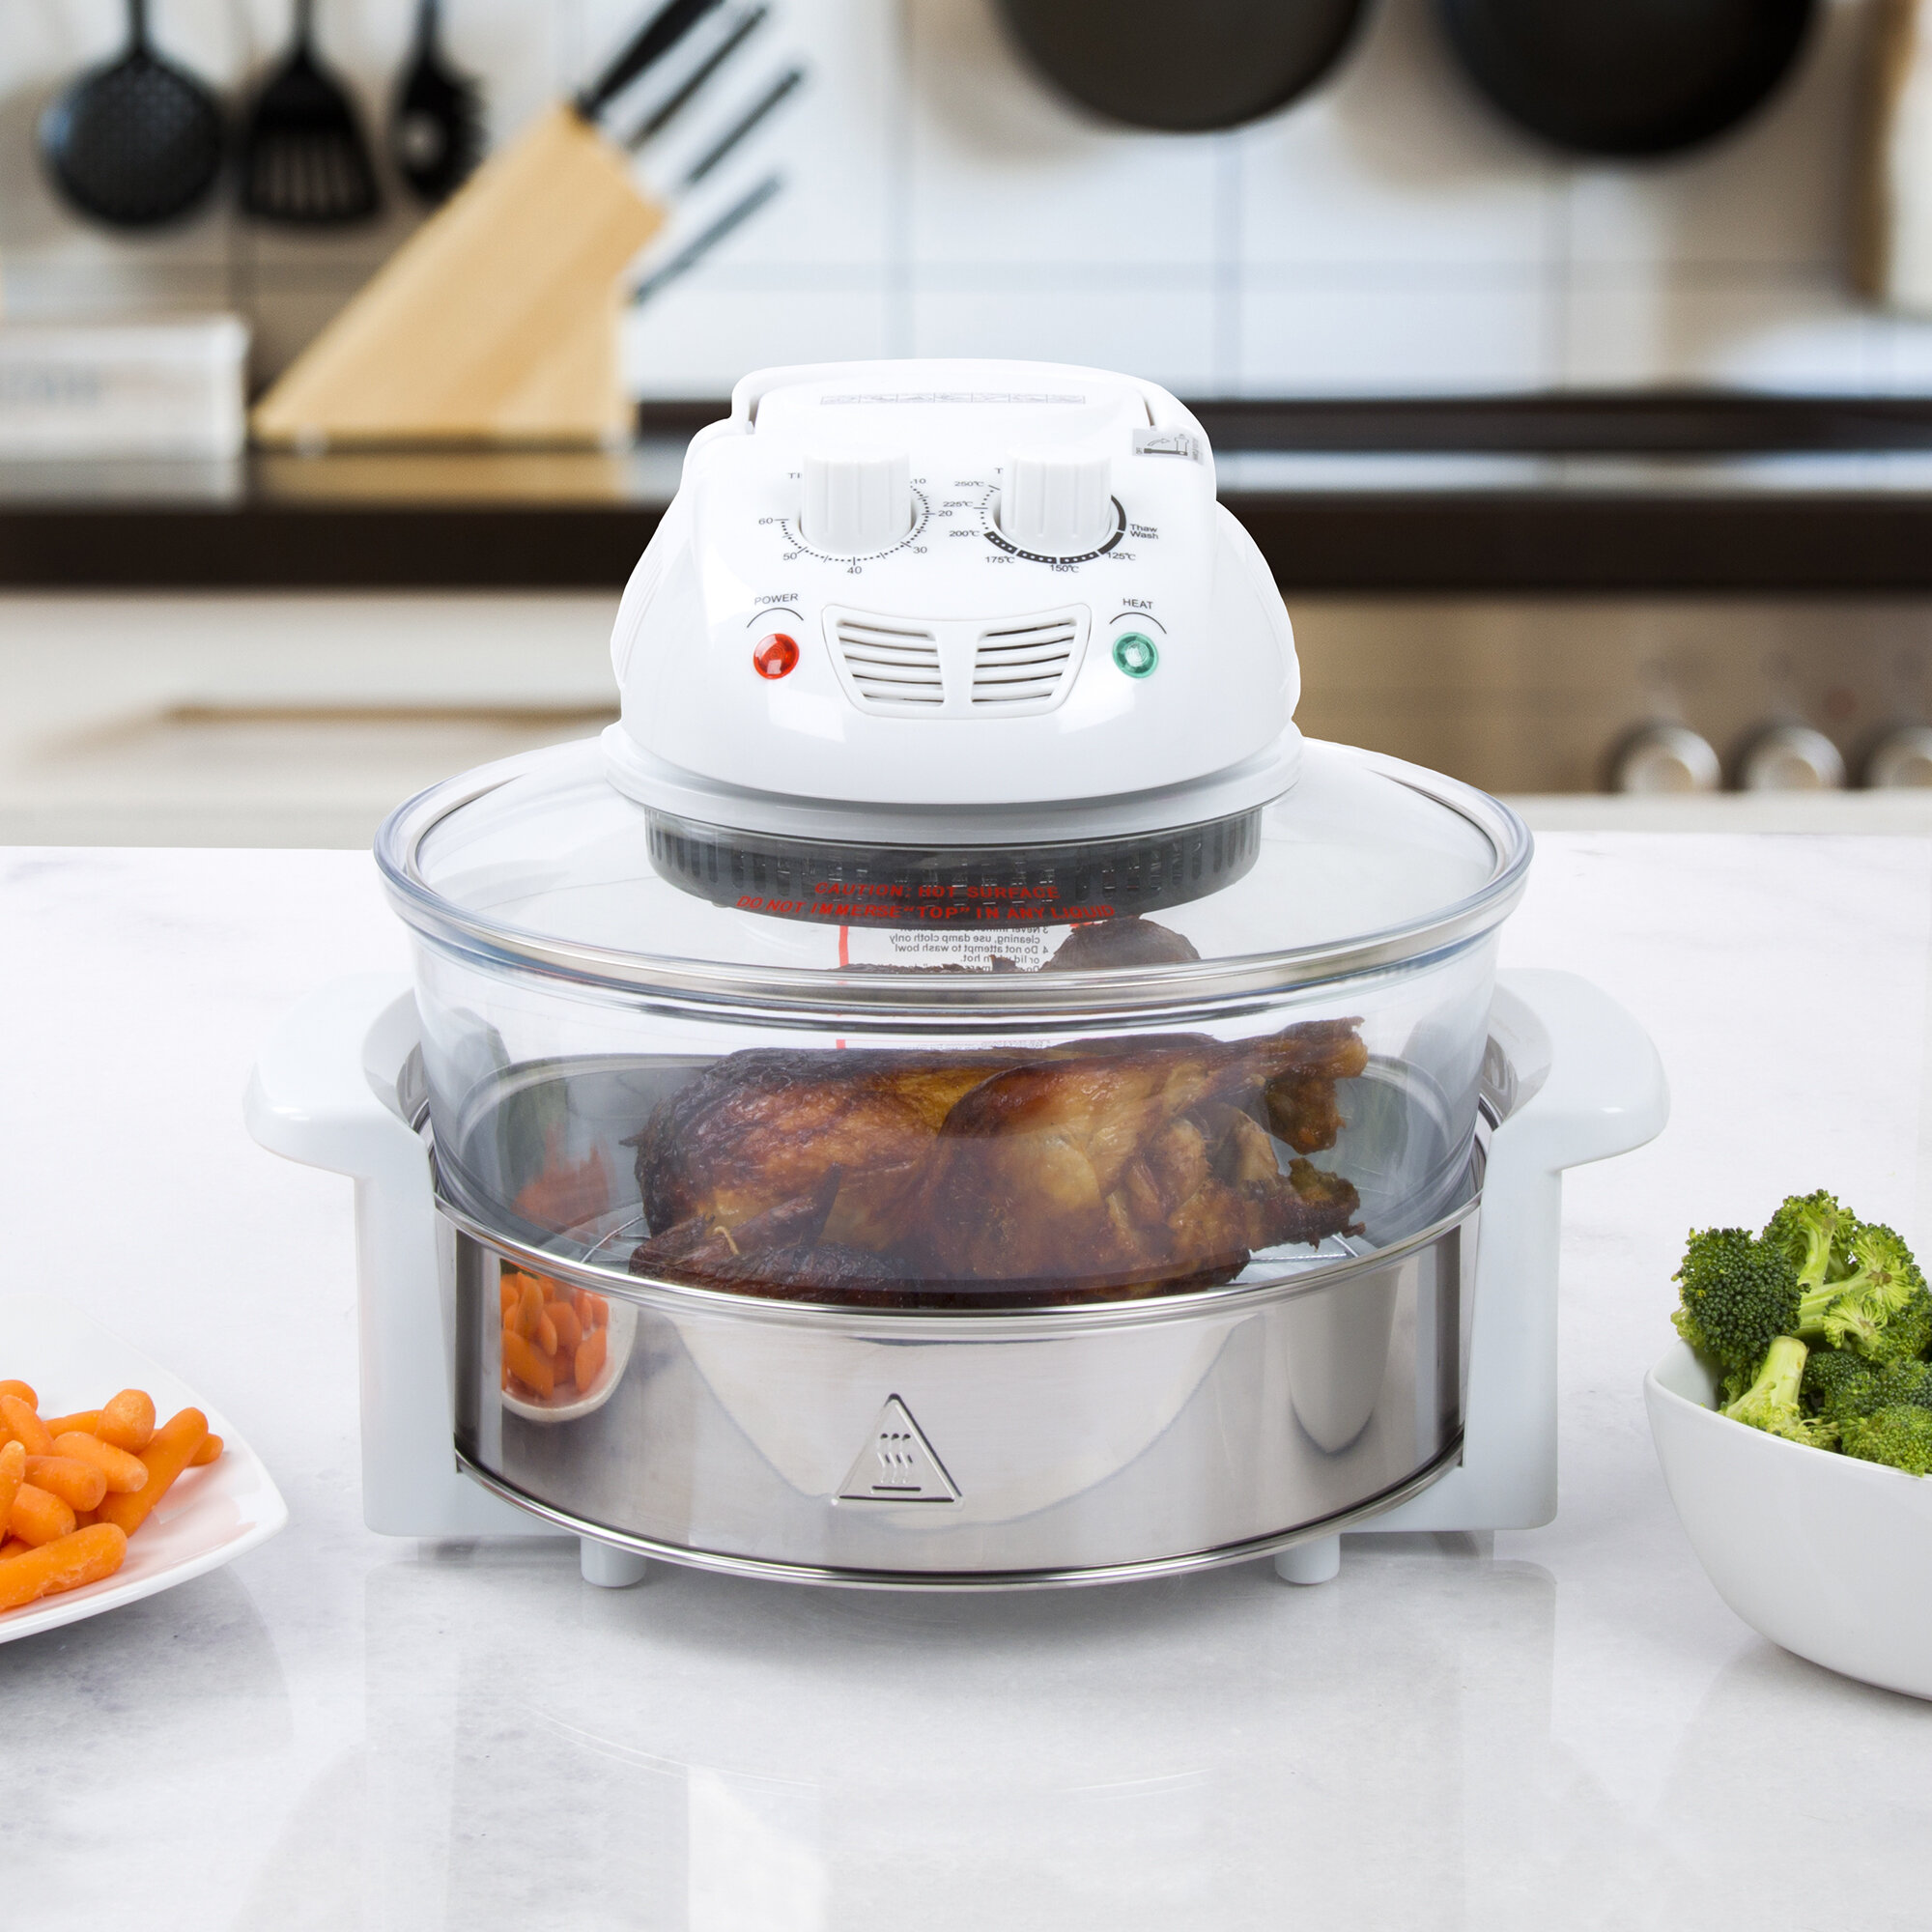 Best cookers - top 10 cookers for frying, baking, roasting, and grilling